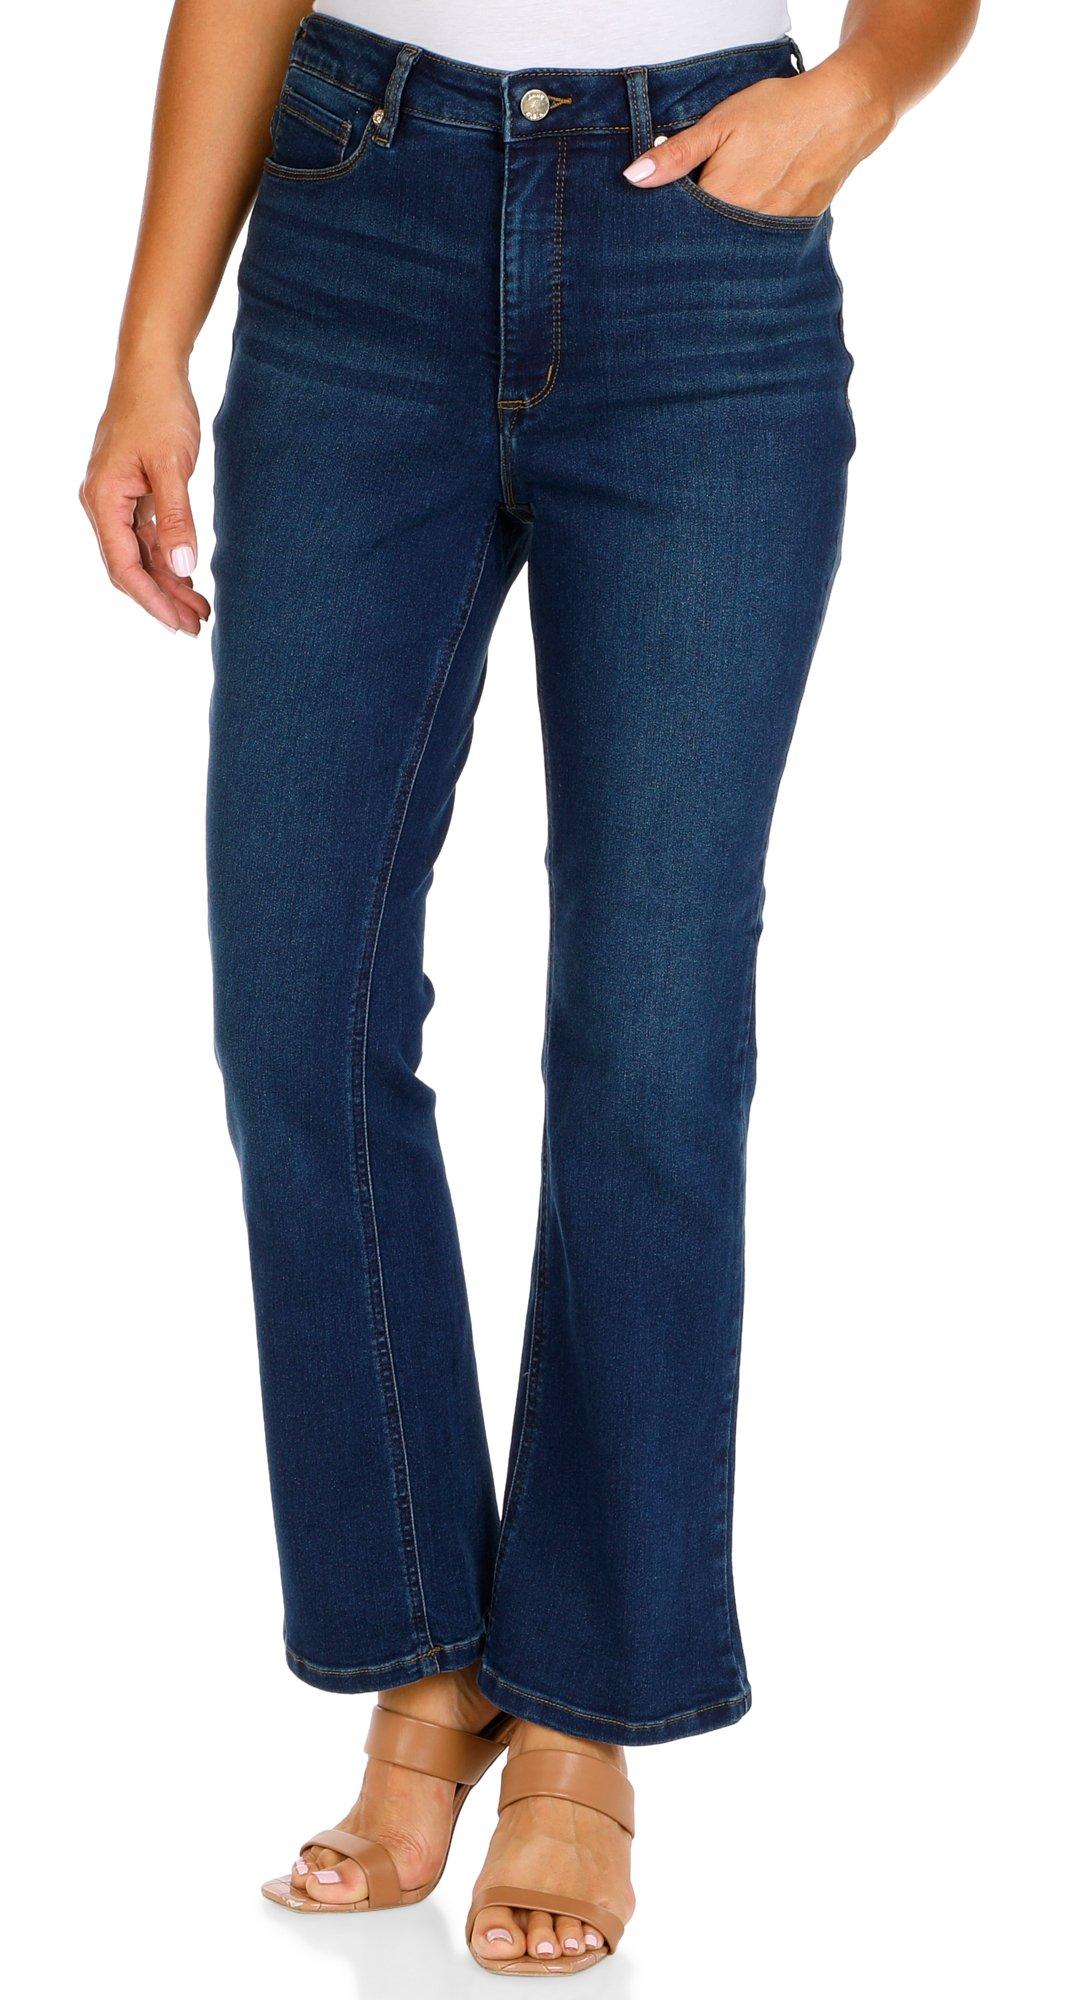 Women's Solid Boot Cut Jeans